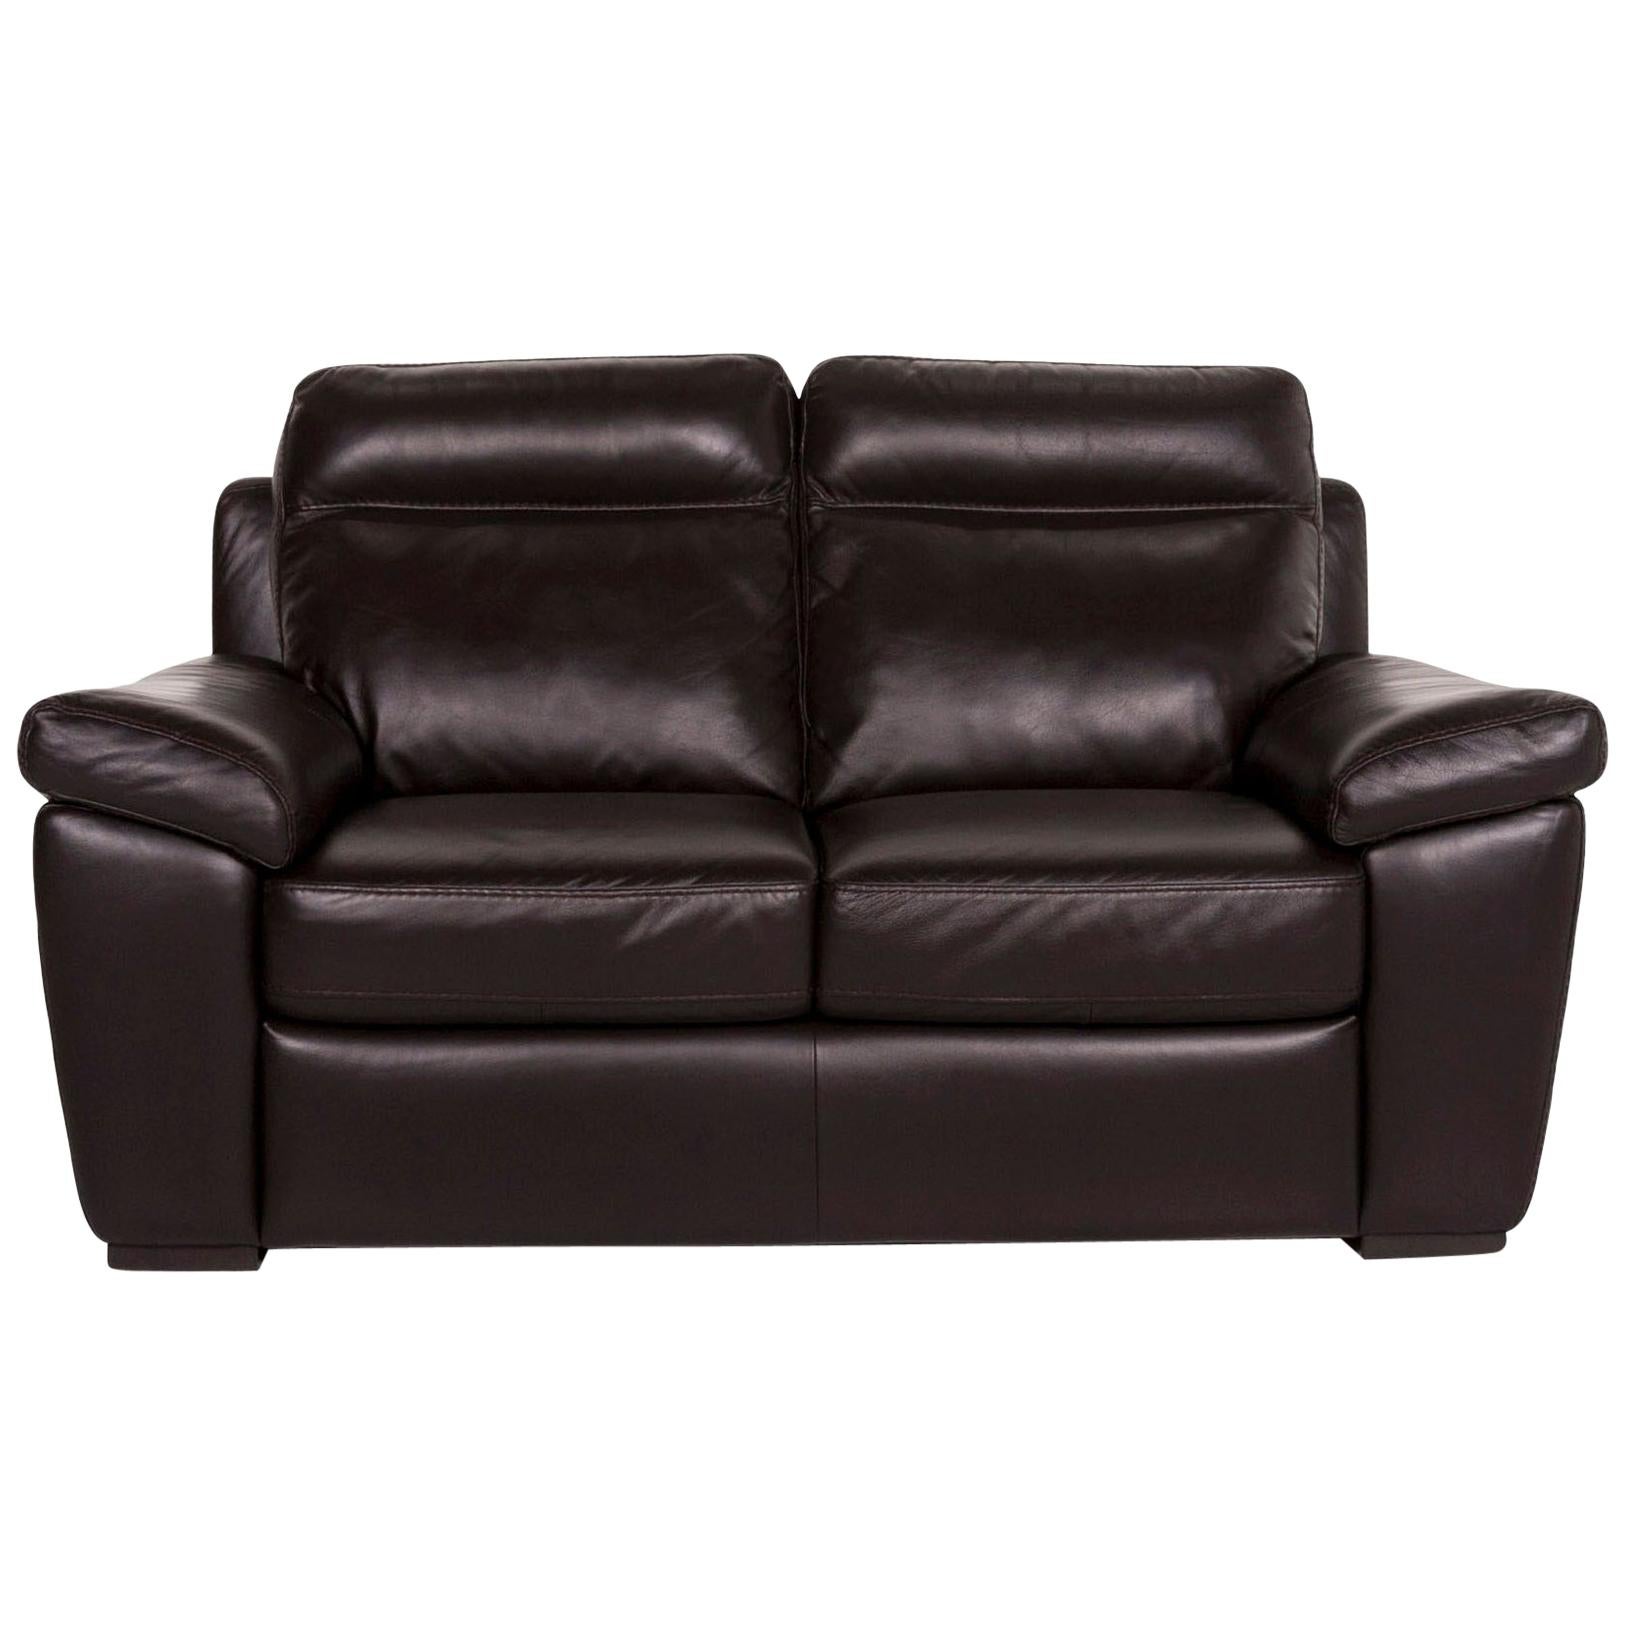 Natuzzi Leather Sofa Brown Dark Brown Two-Seat Couch